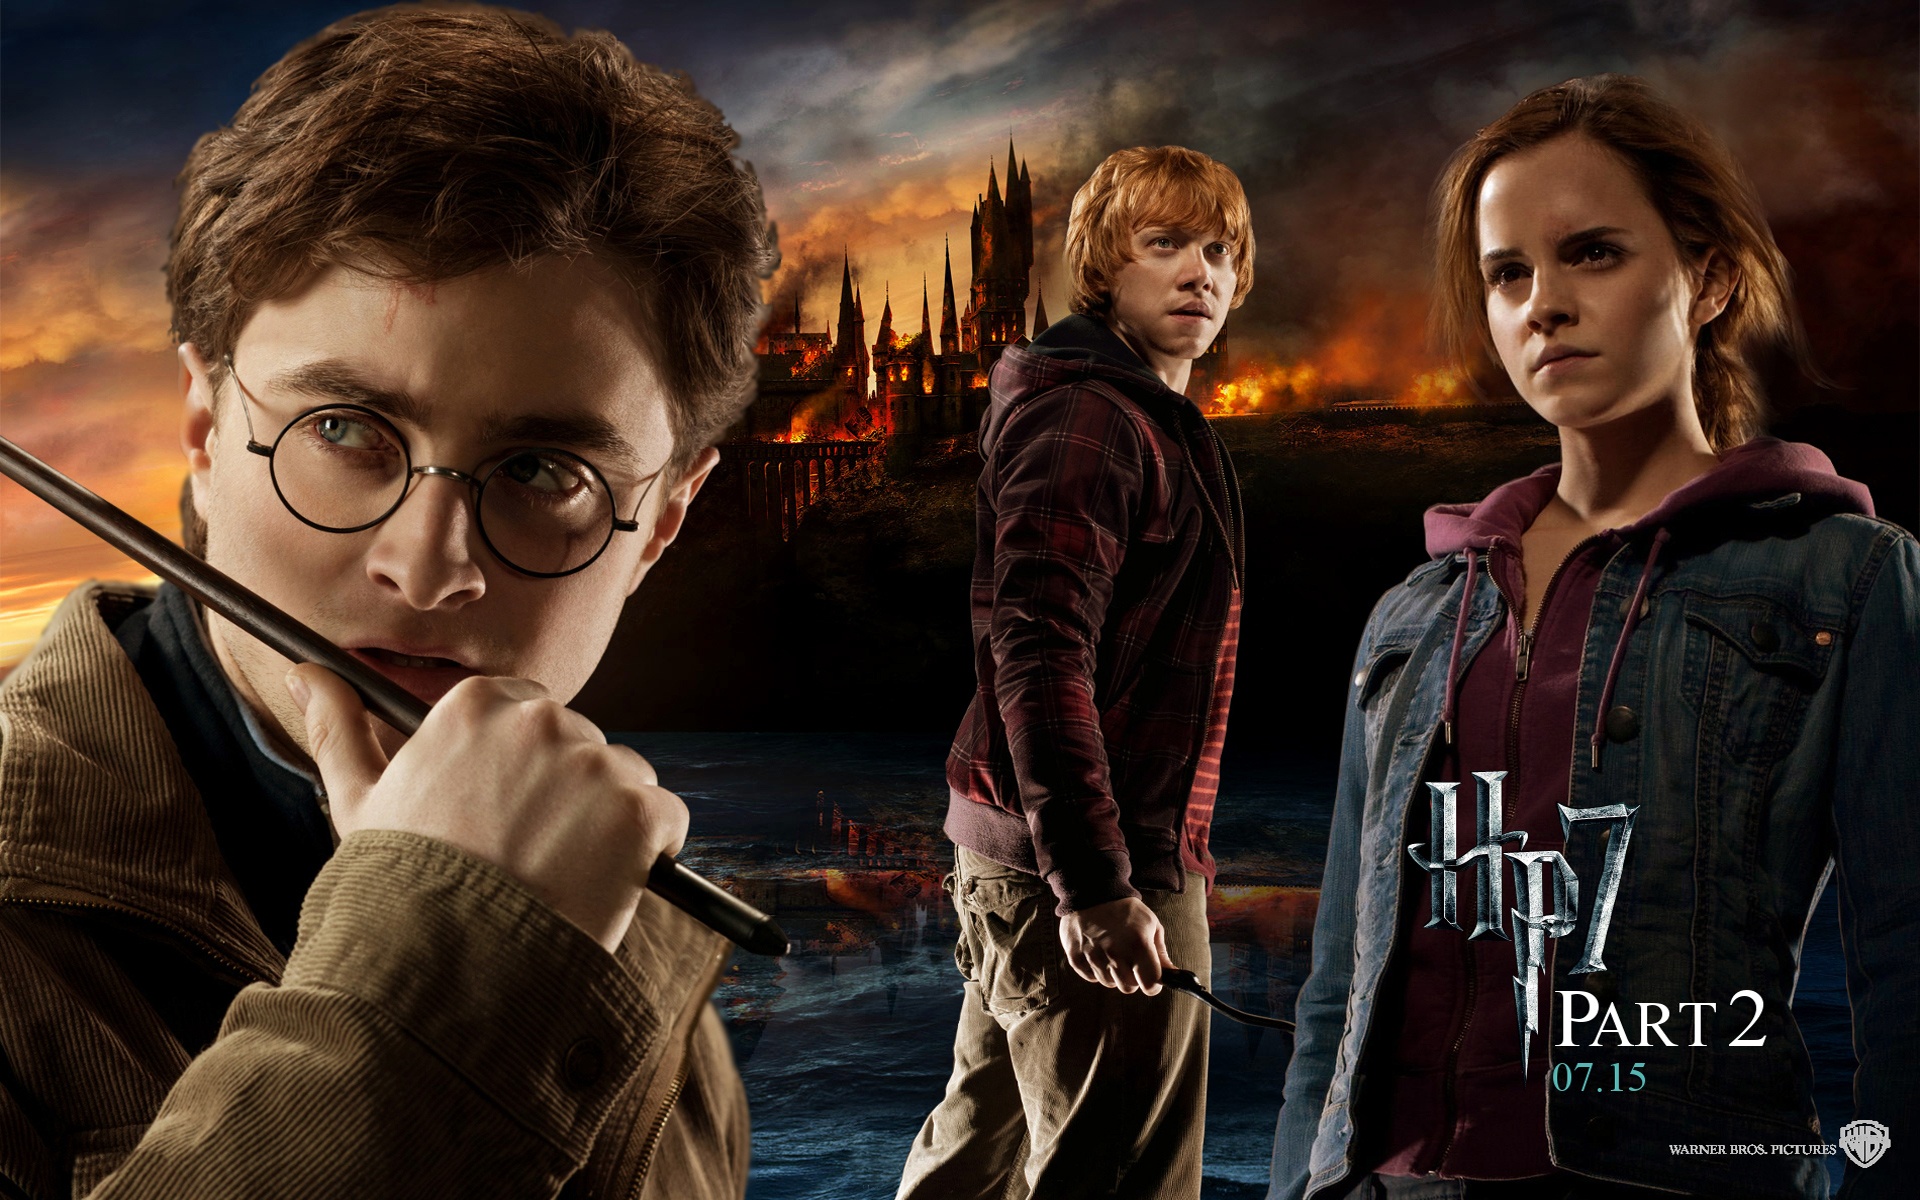 Harry Potter And The Deathly Hallows: Part 2 Wallpaper for desktop devices